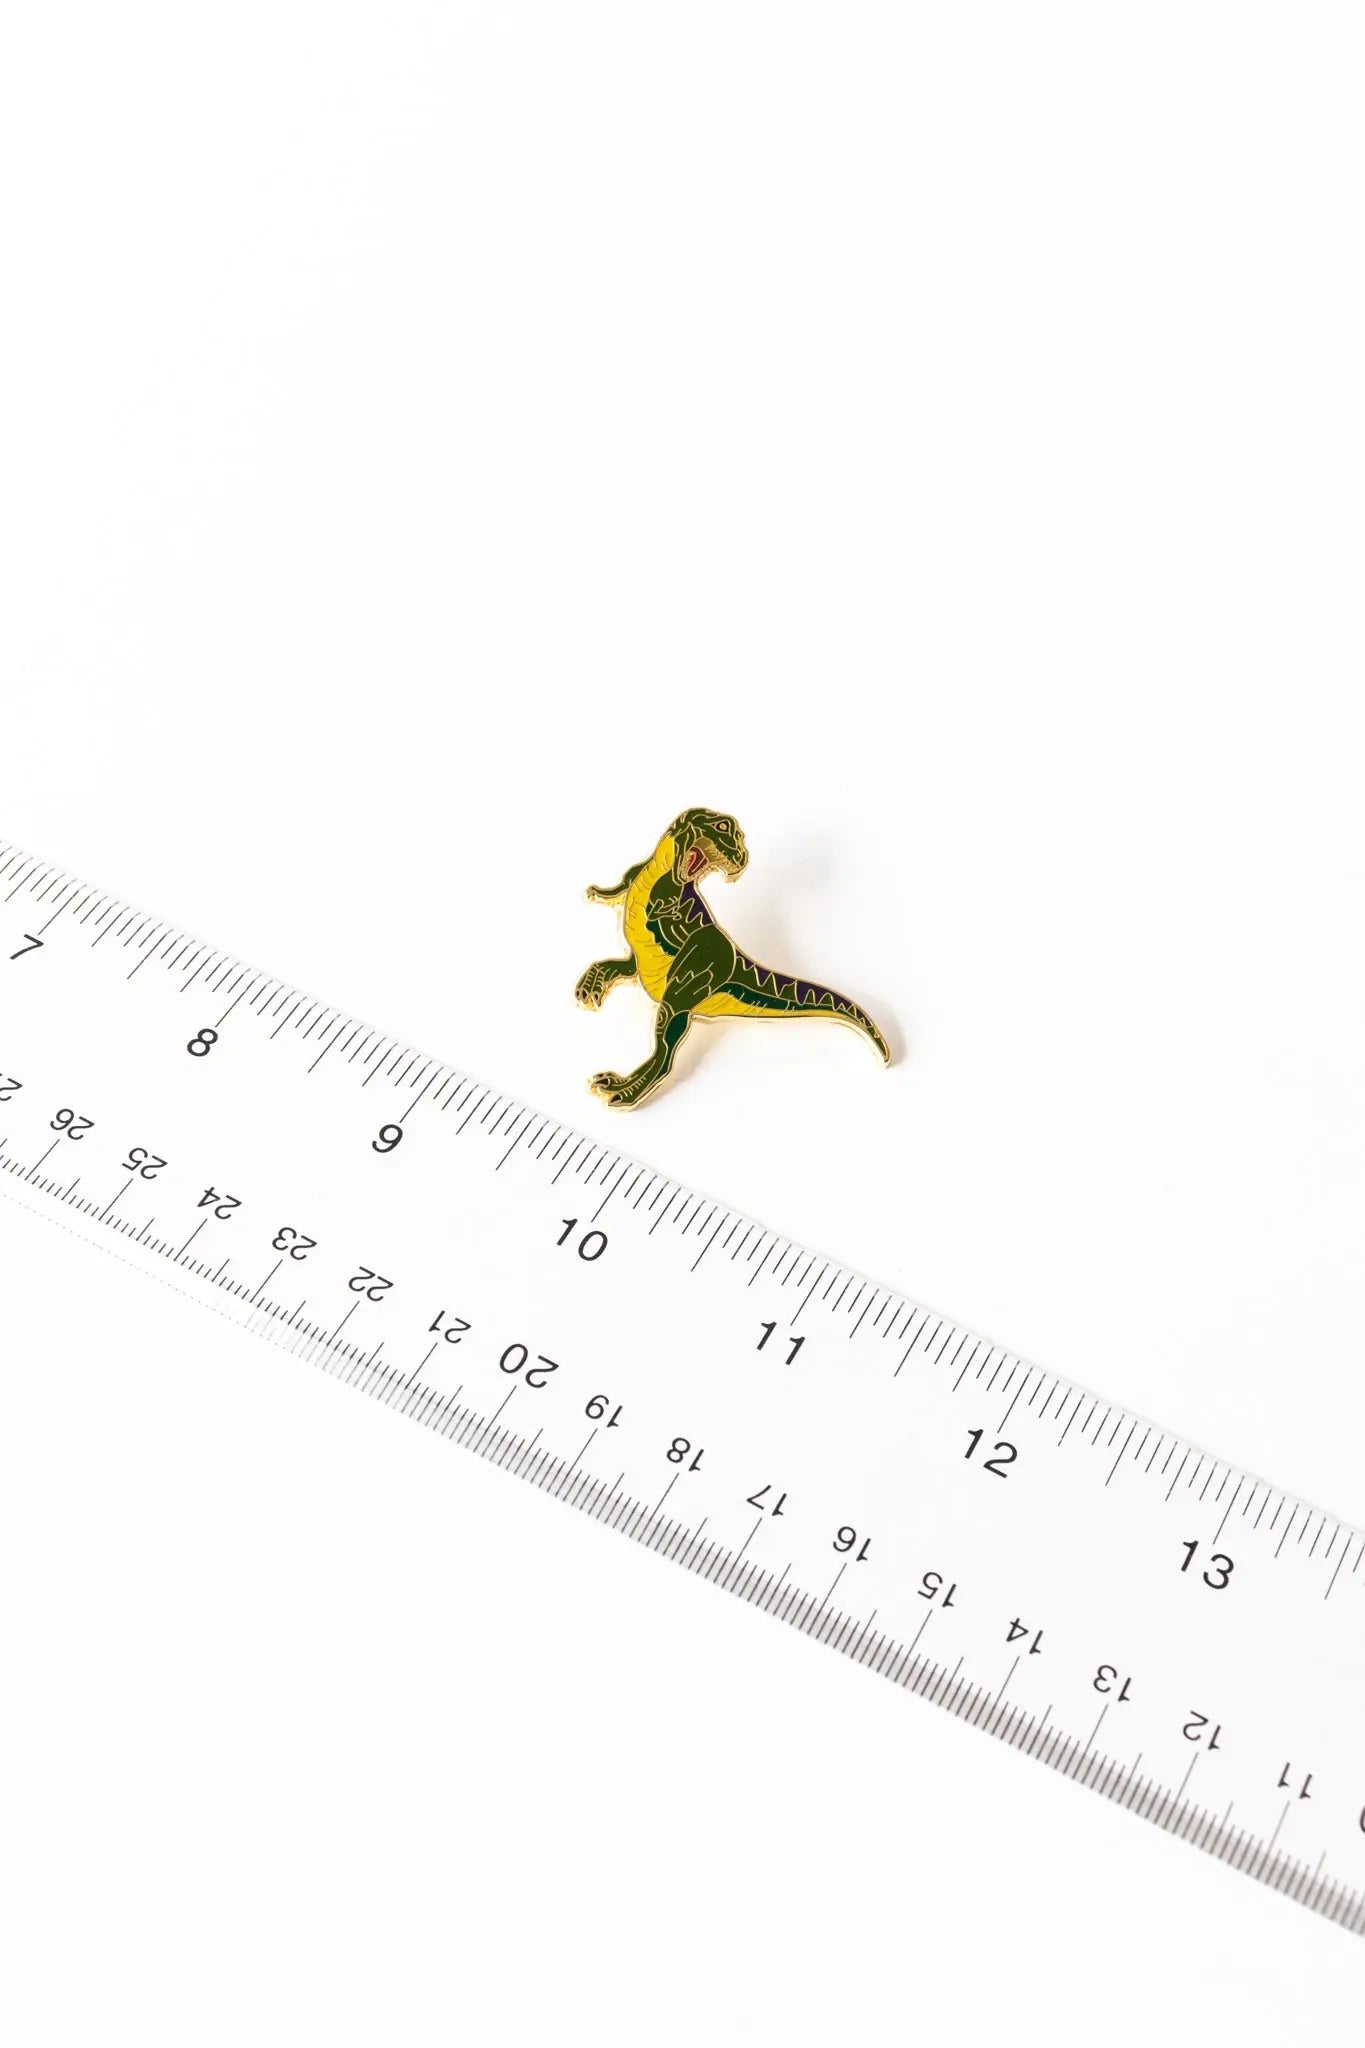 Tyrannosaurus Rex Pin (without Feathers) - Stemcell Science Shop